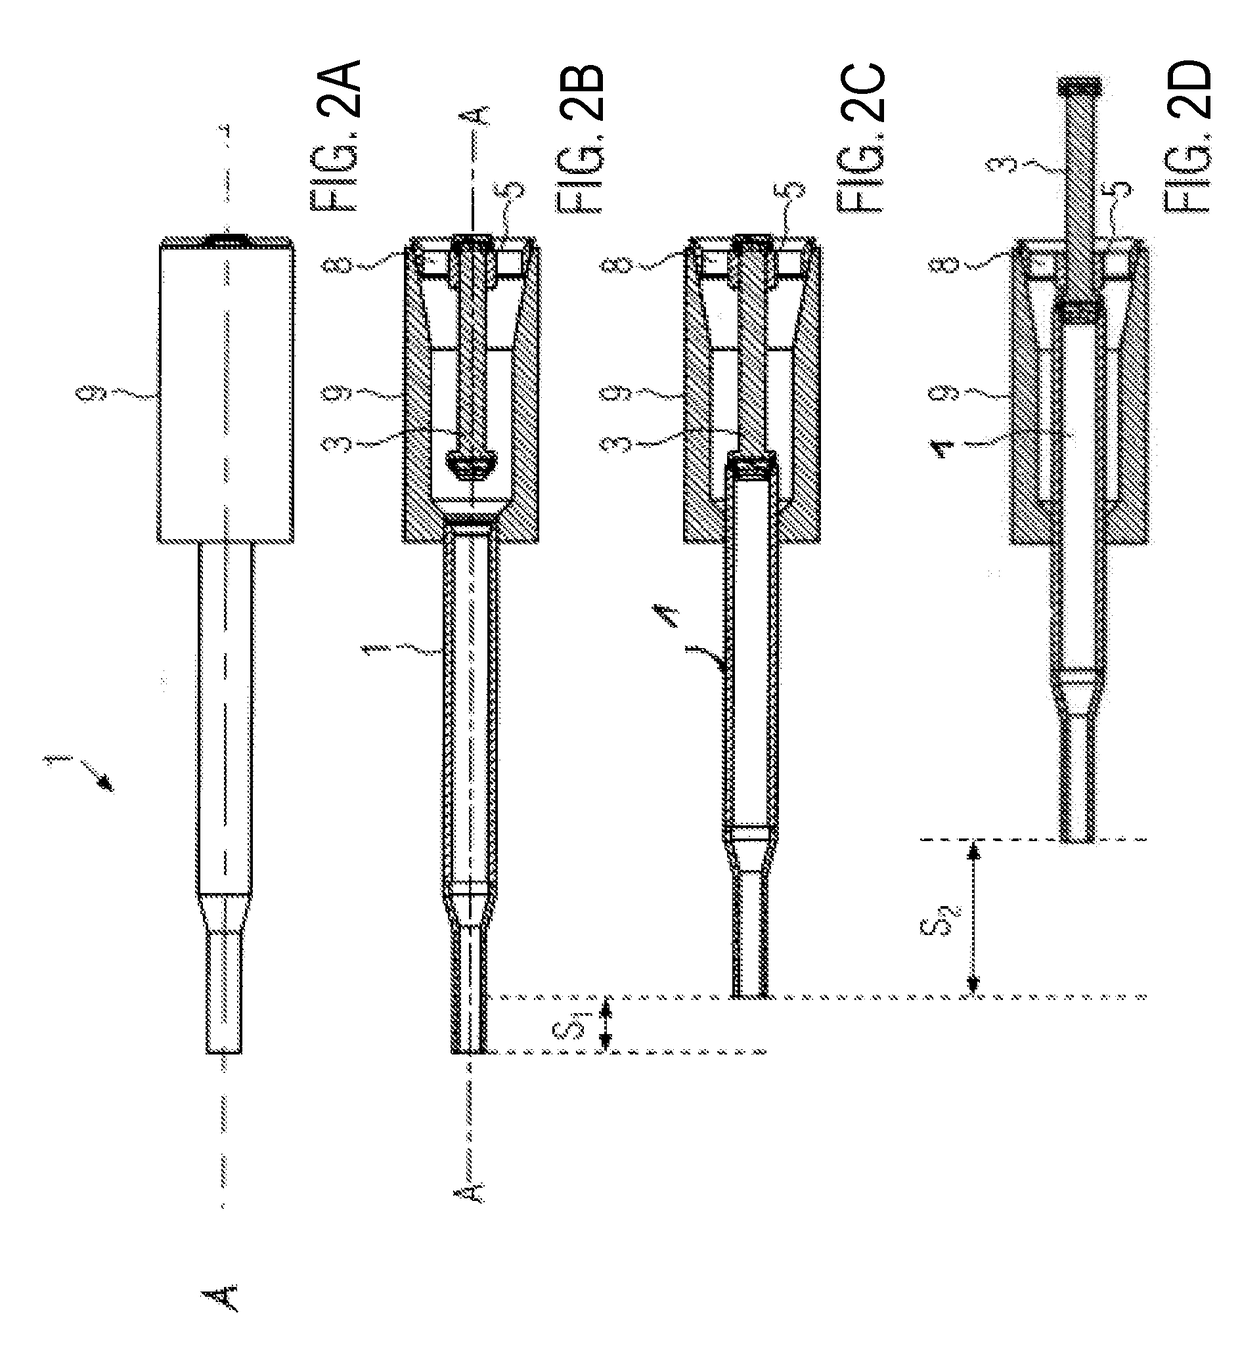 Method and device for filling of sausage sleeves